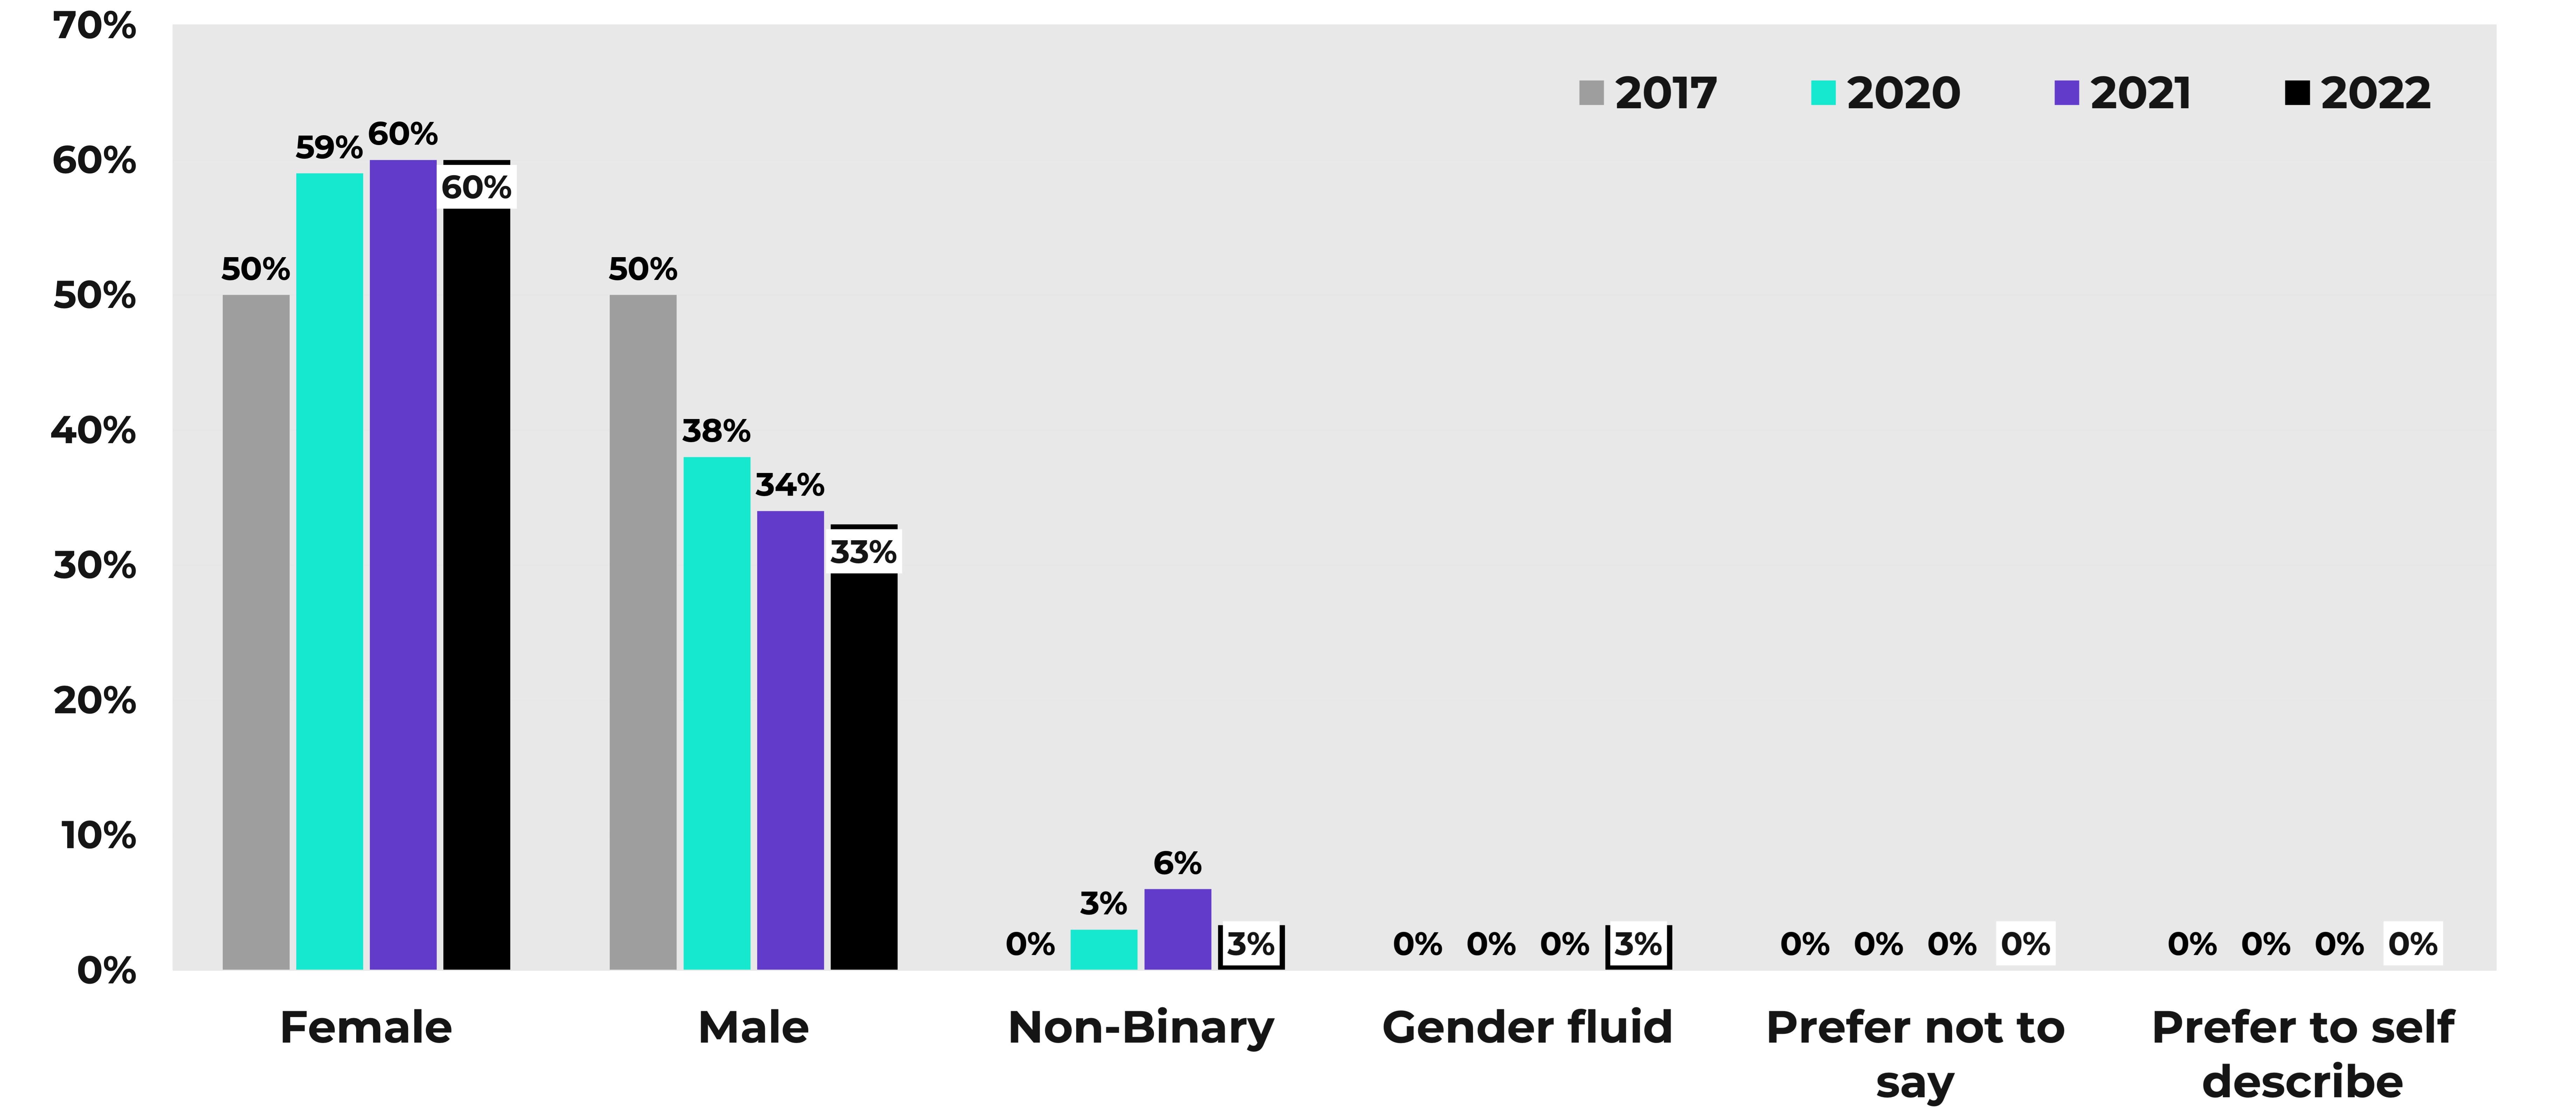 A bar chart displaying the proportions of different gender identities in the Youth Music team from 2017 to 2022.